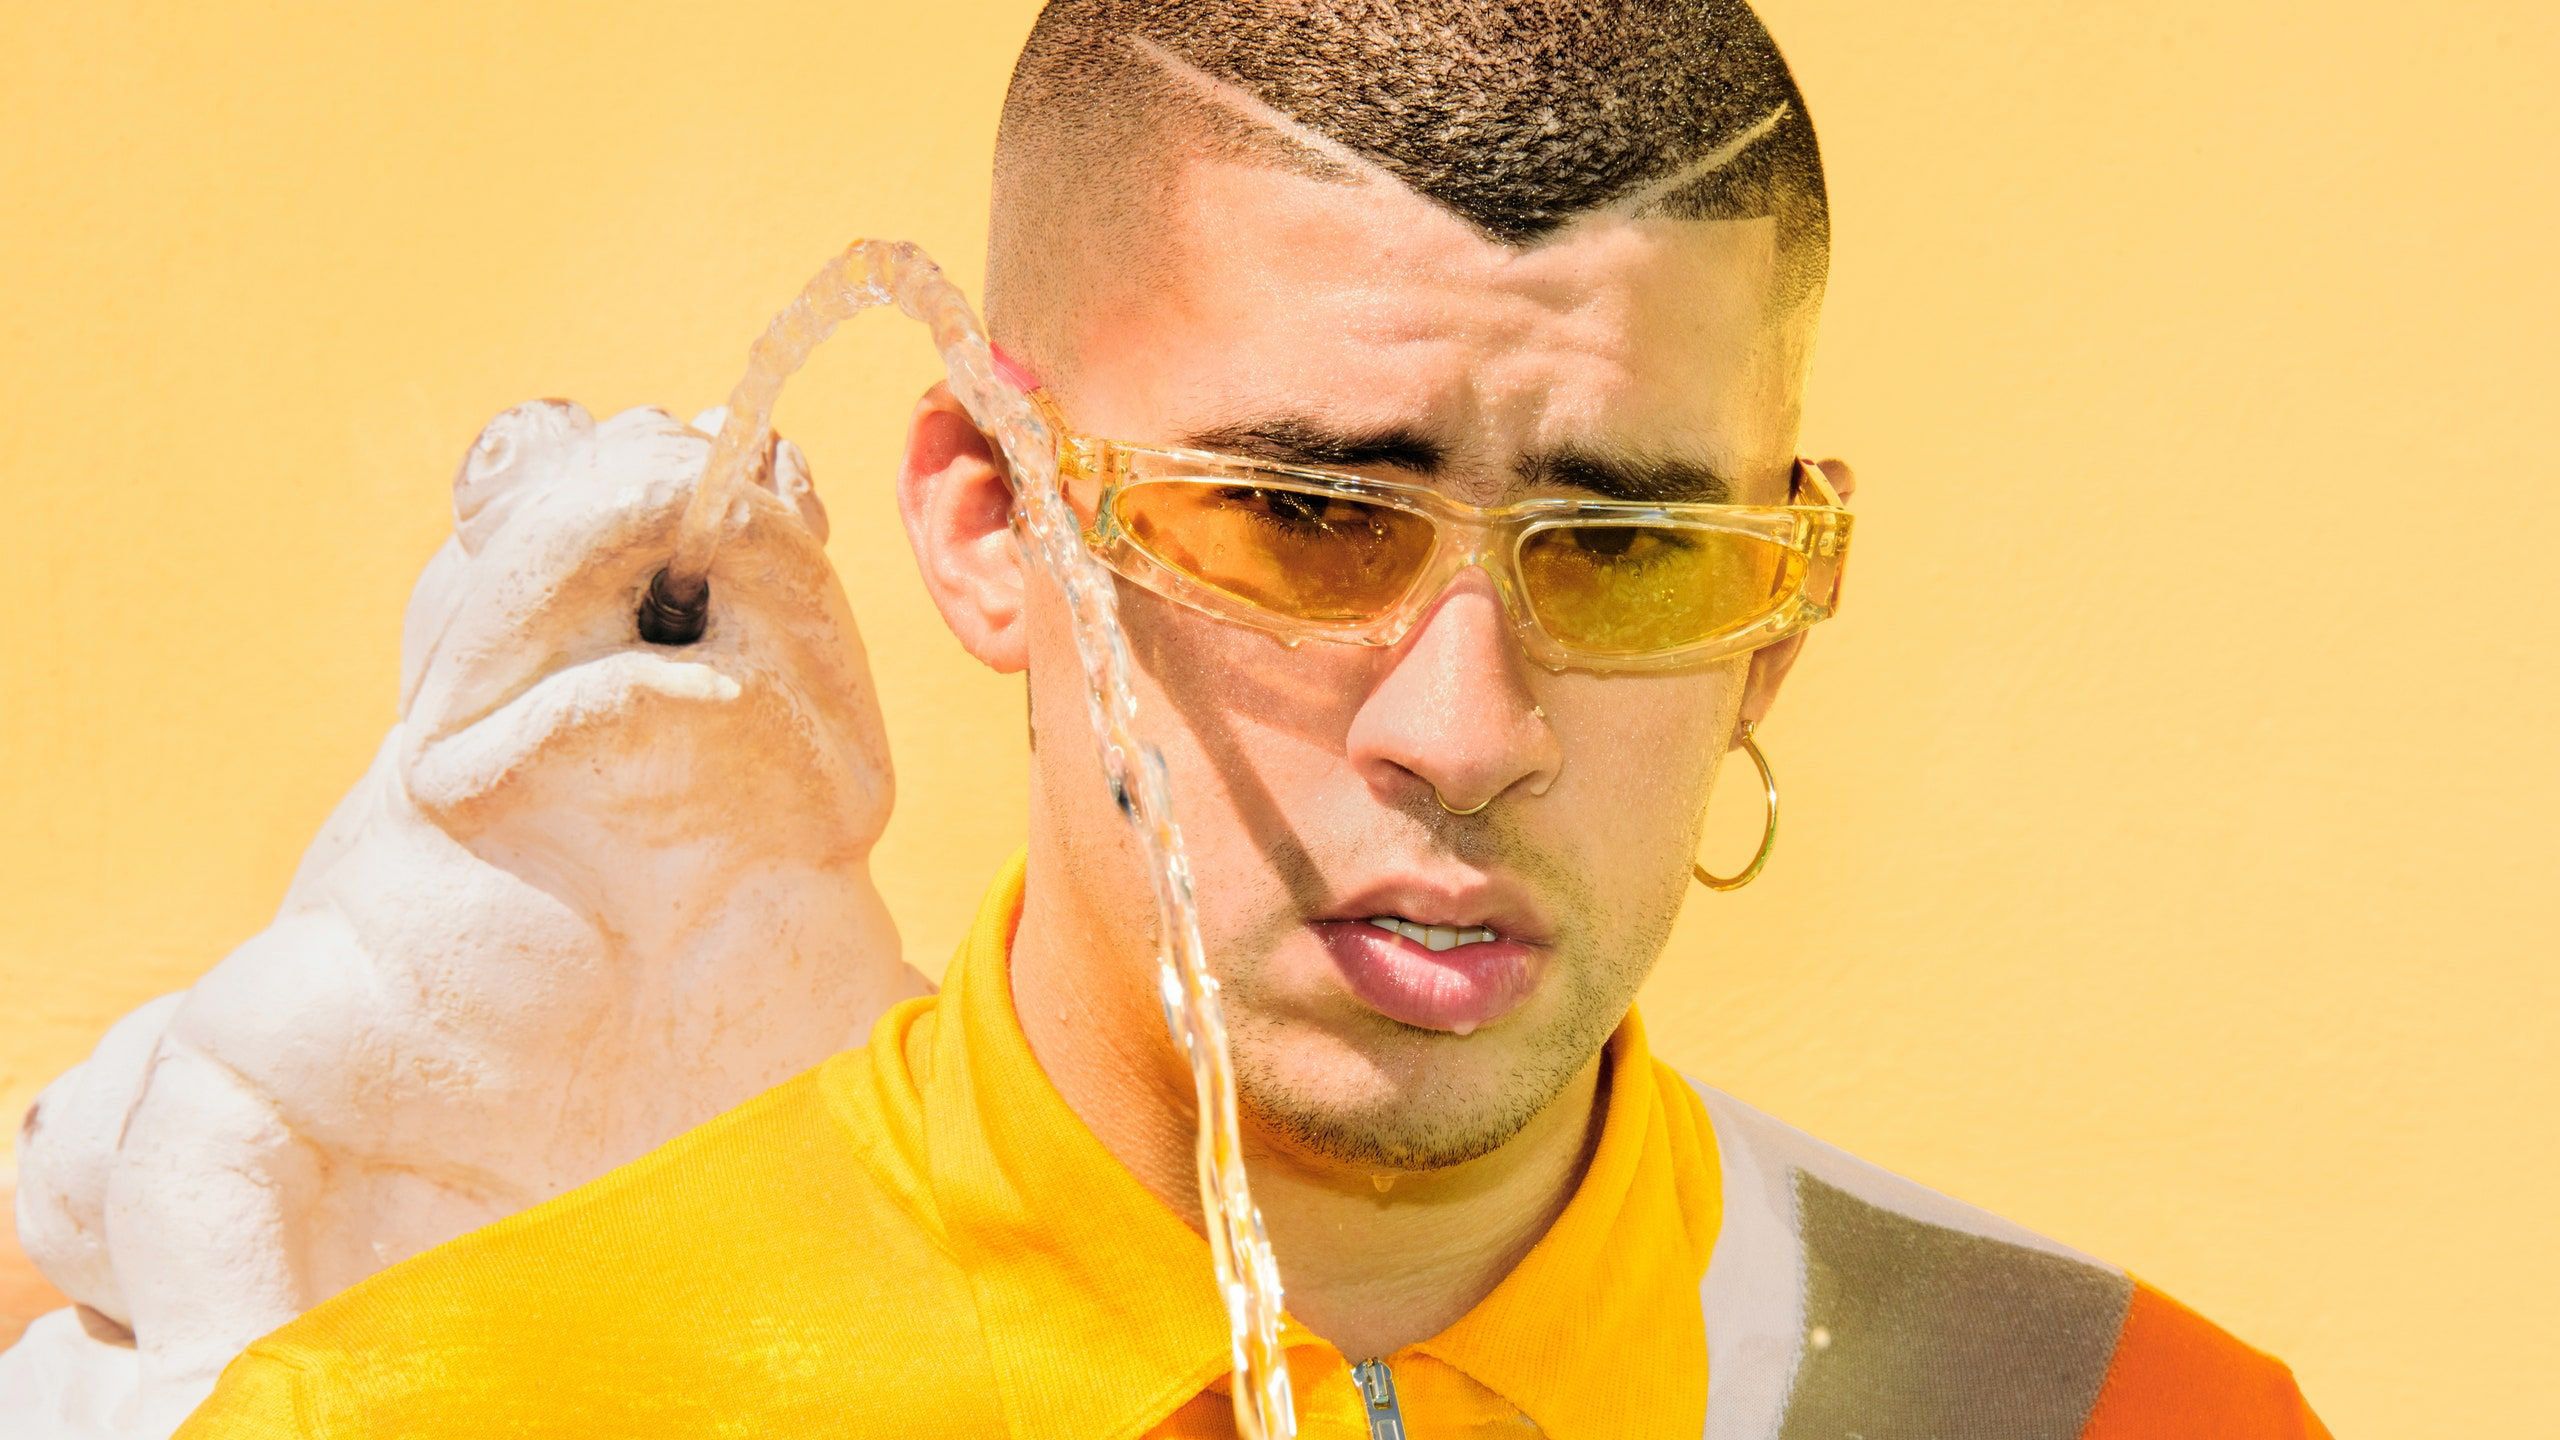 Bad Bunny Aesthetic In Yellow Background Wearing Yellow Dress And Sunglases With Water Spitting Frog Backside HD Music Wallpaper